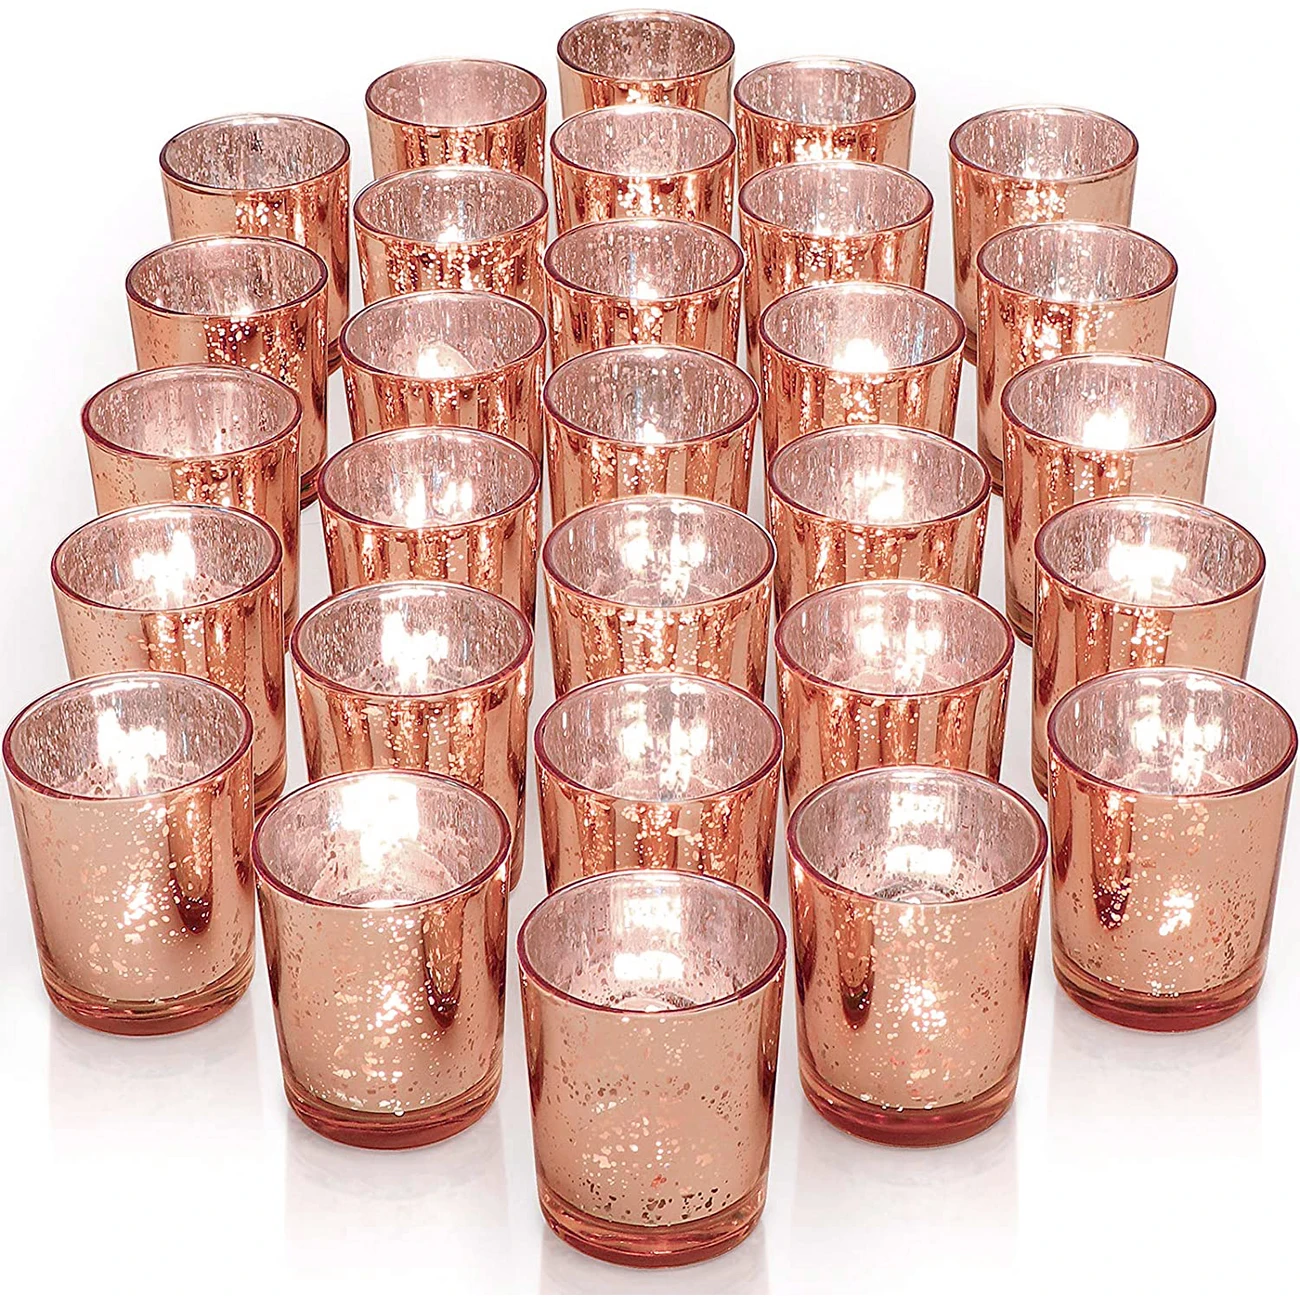 

12 PCS Rose Gold Votive Candle Holders Speckled Mercury Bulk Ideal for Wedding Centerpieces Party Supplies Valentine's Day Table